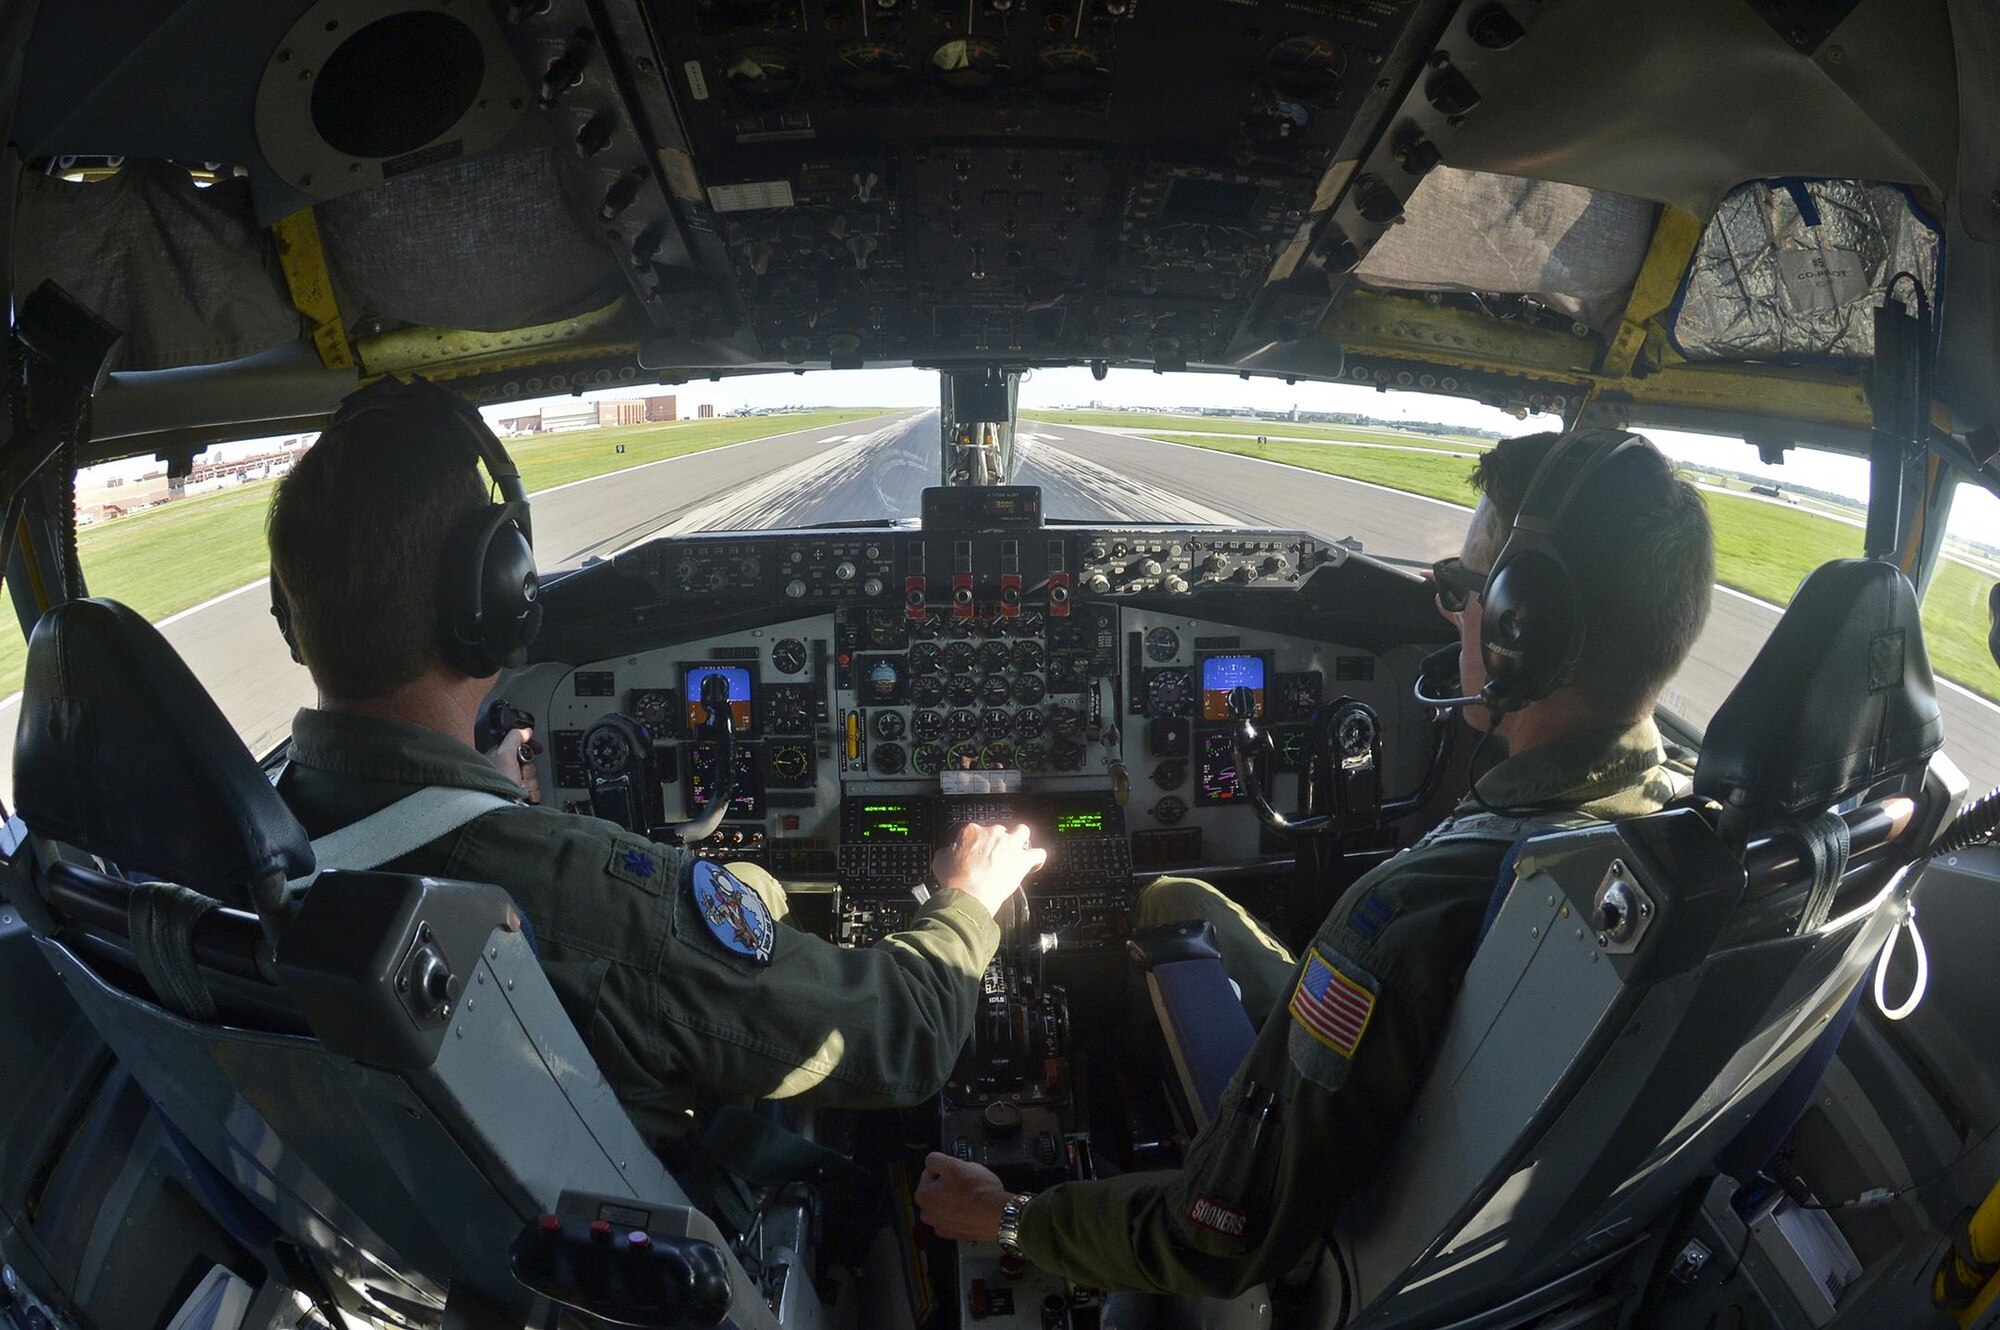 U.S. Air Force Lt. Col. Mark Hole, pilot, and Captain Thomas Bryceland, co-pilot, 185th Air Refueling Squadron, prepare for takeoff in the KC-135 Stratotanker for the last time during the last training mission of the 185 ARS on Tinker Air Force base, June 30, 2015 at Tinker Air Force base, Okla.  The 185th will be transitioning to Air Force Special Operations Command effective July 1, 2015. (U.S. Air Force photo by Tech Sgt. Caroline Essex/Released)